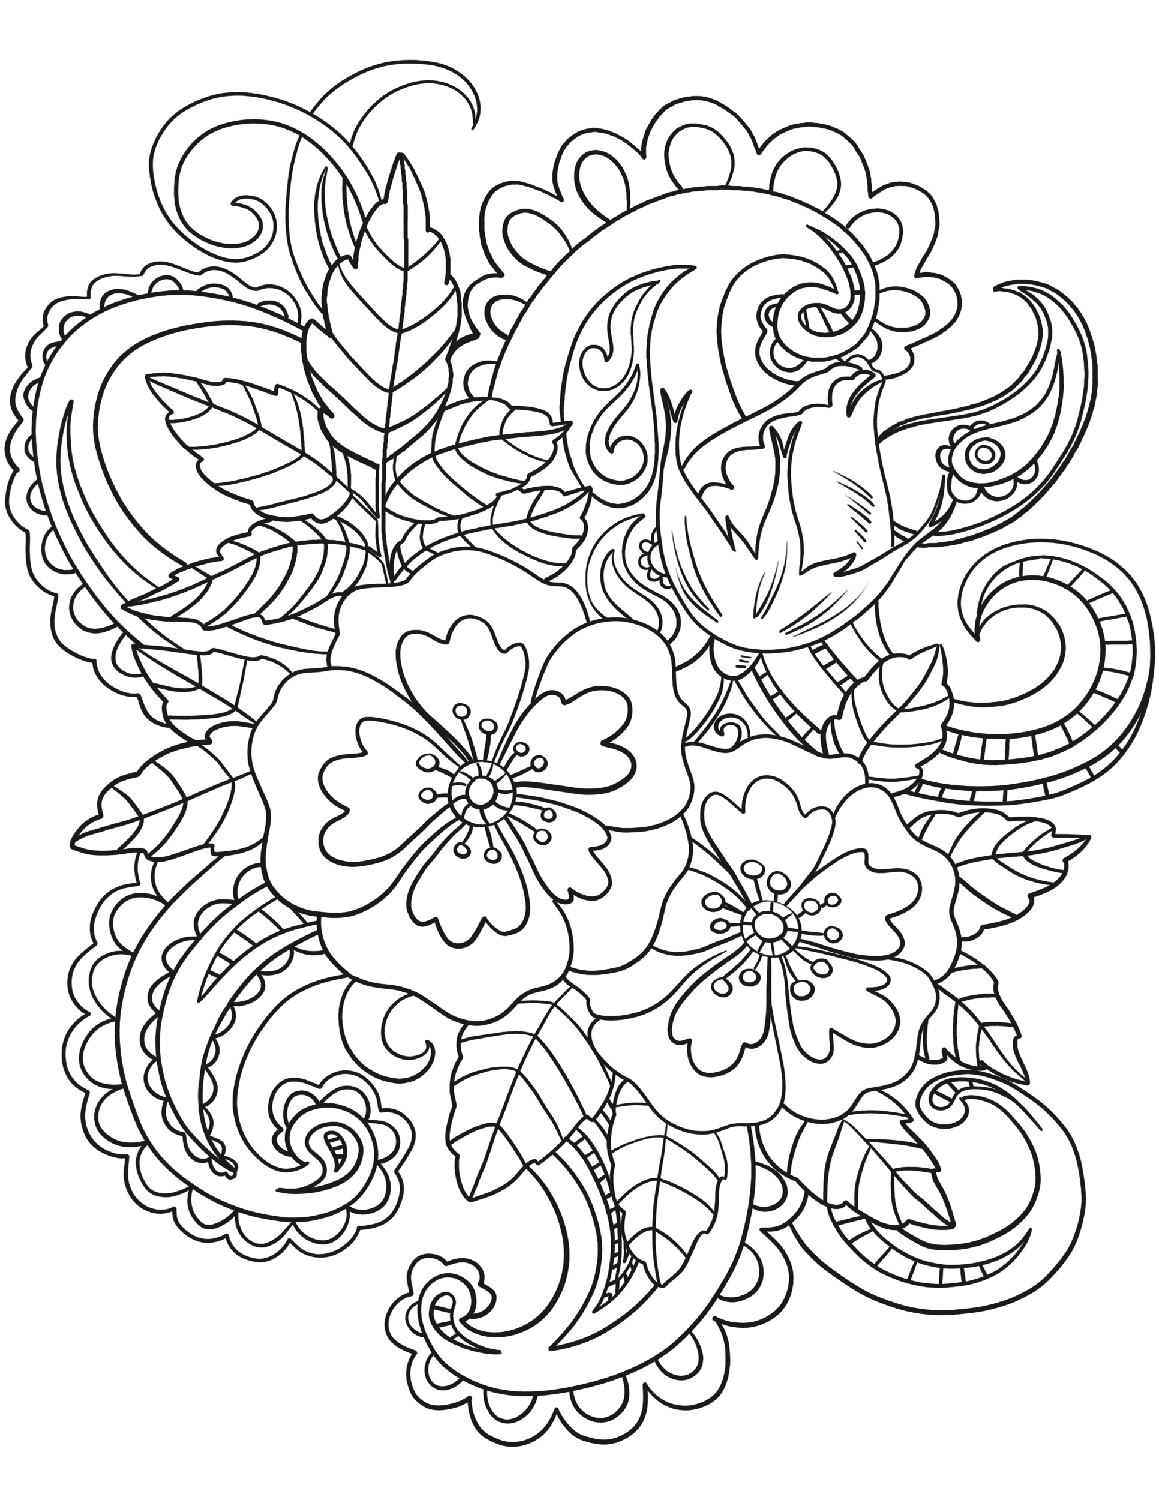 Download Floral Coloring Pages For Adults Best Coloring Pages For Kids